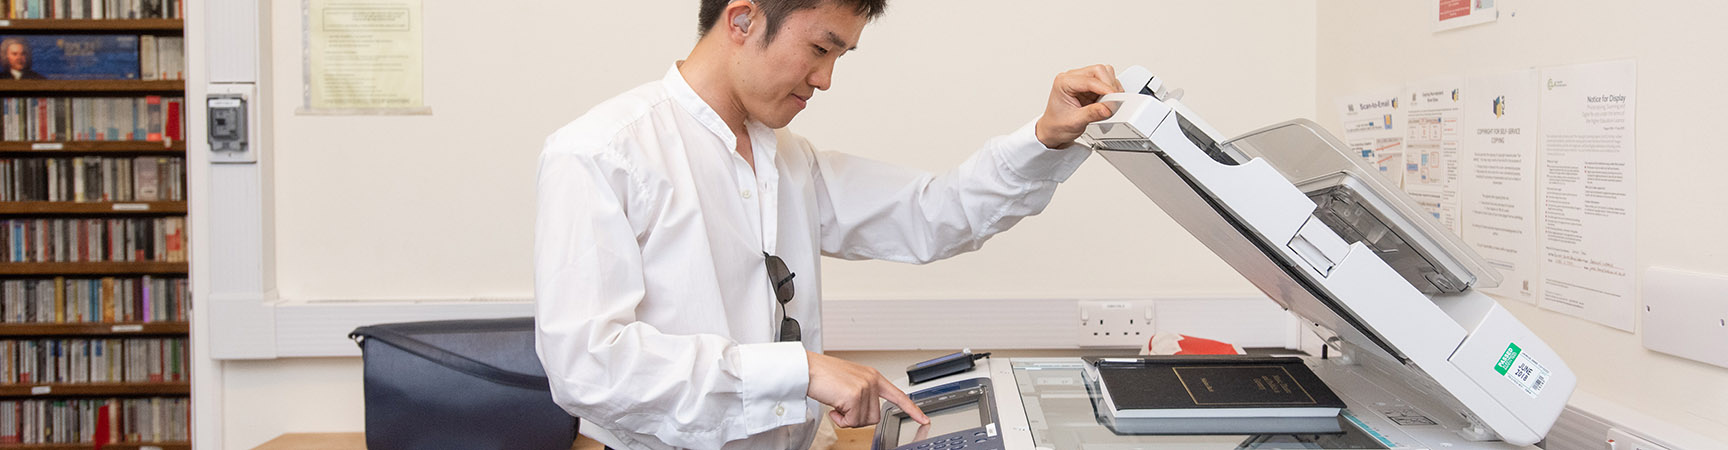 A student opening the top of a photocopier / scanner